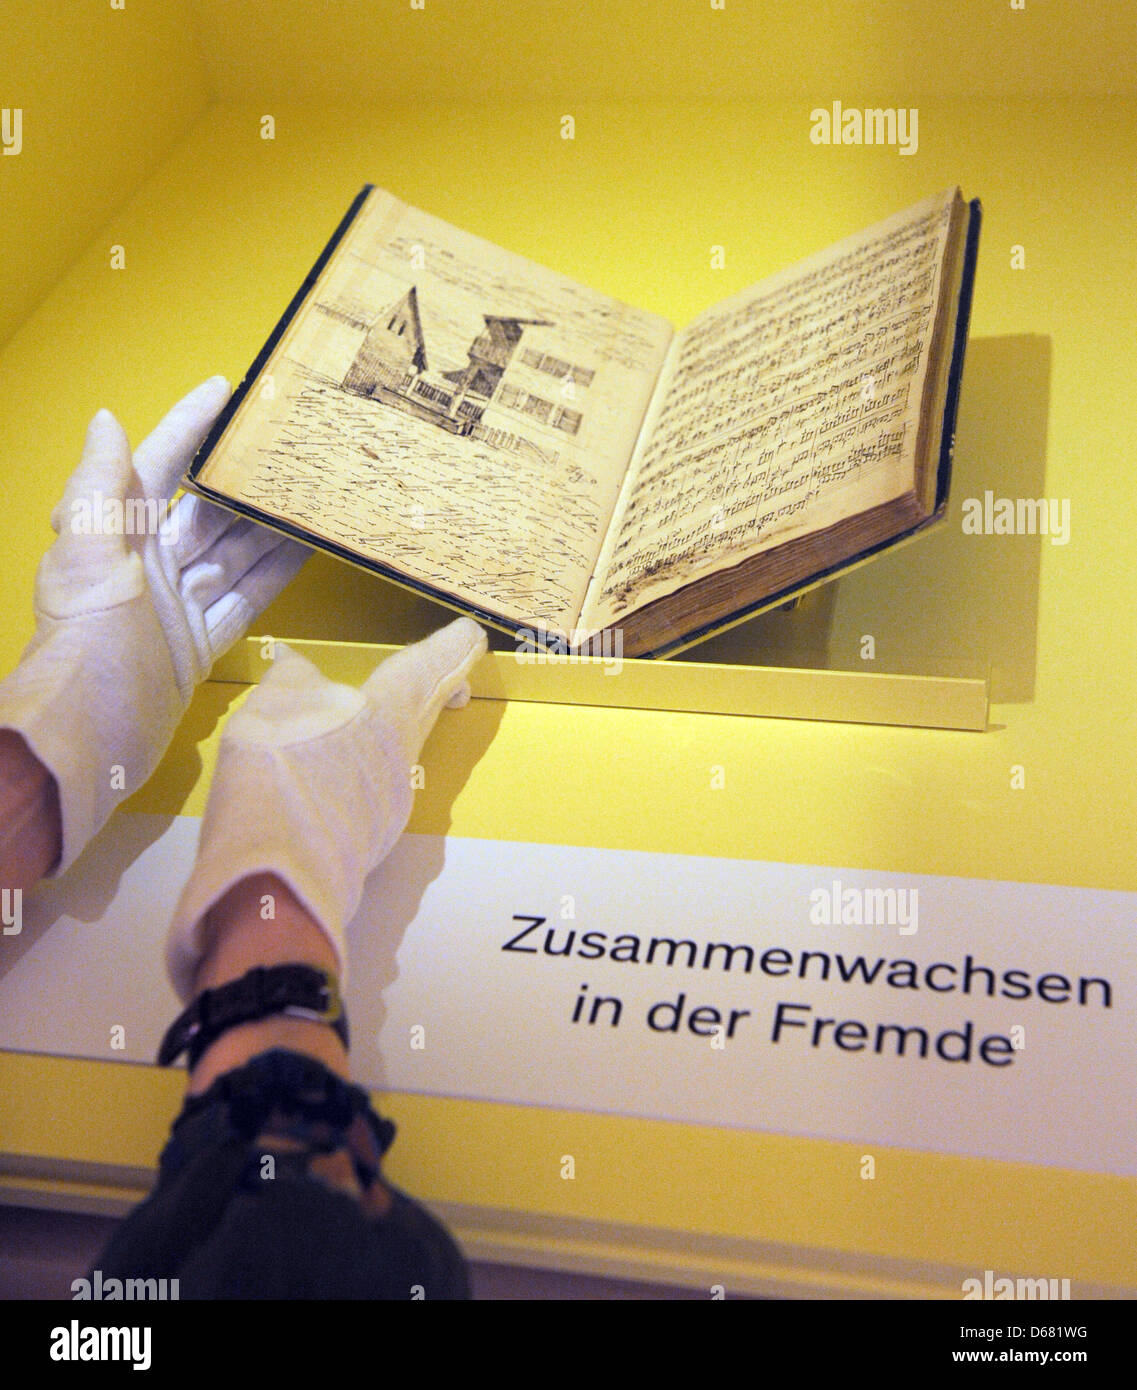 An employee of the Augustiner Museum places the diary of Felix Mendelssohn Bartholdy (1809-1847) in a showcase at the museum in Freiburg, Germany, 02 July 2012. Until 30 September 2012, the composer's diary, written with his wife Cécile, will be on loan from the Bodleian Library at Oxford. Photo: PATRICK SEEGER Stock Photo